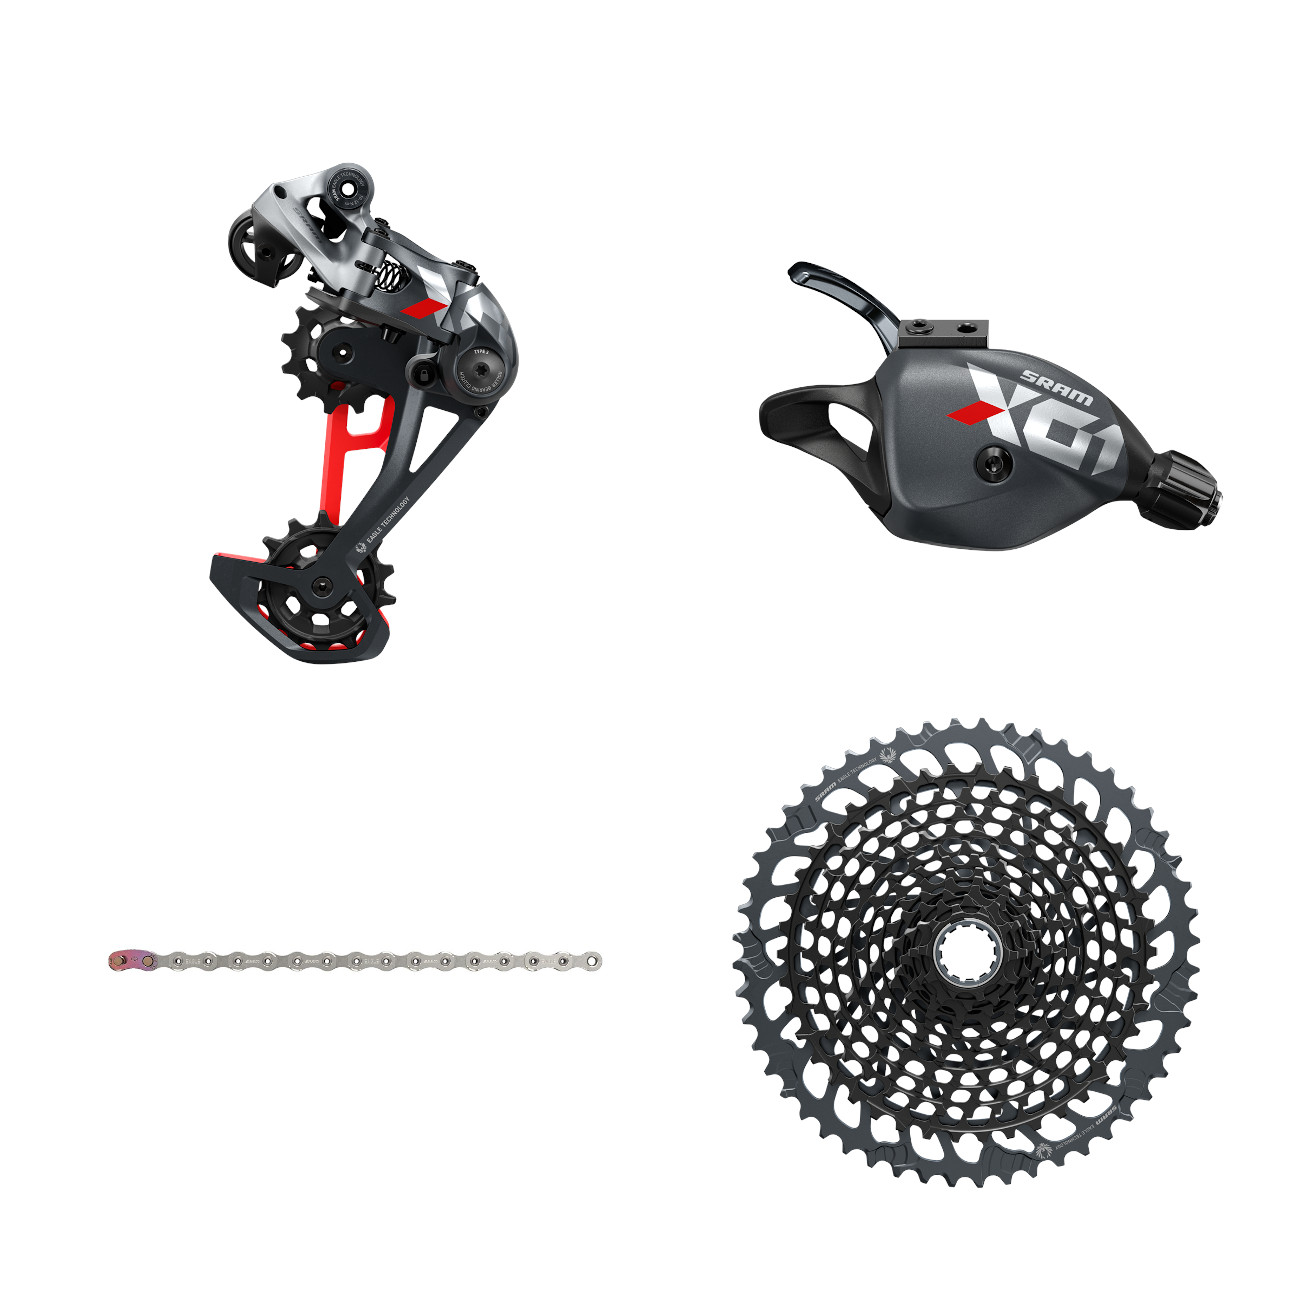 Picture of SRAM X01 Eagle 1x12-speed Upgrade Kit - Trigger Shifter - 10-52 t. Cassette - Black / Red